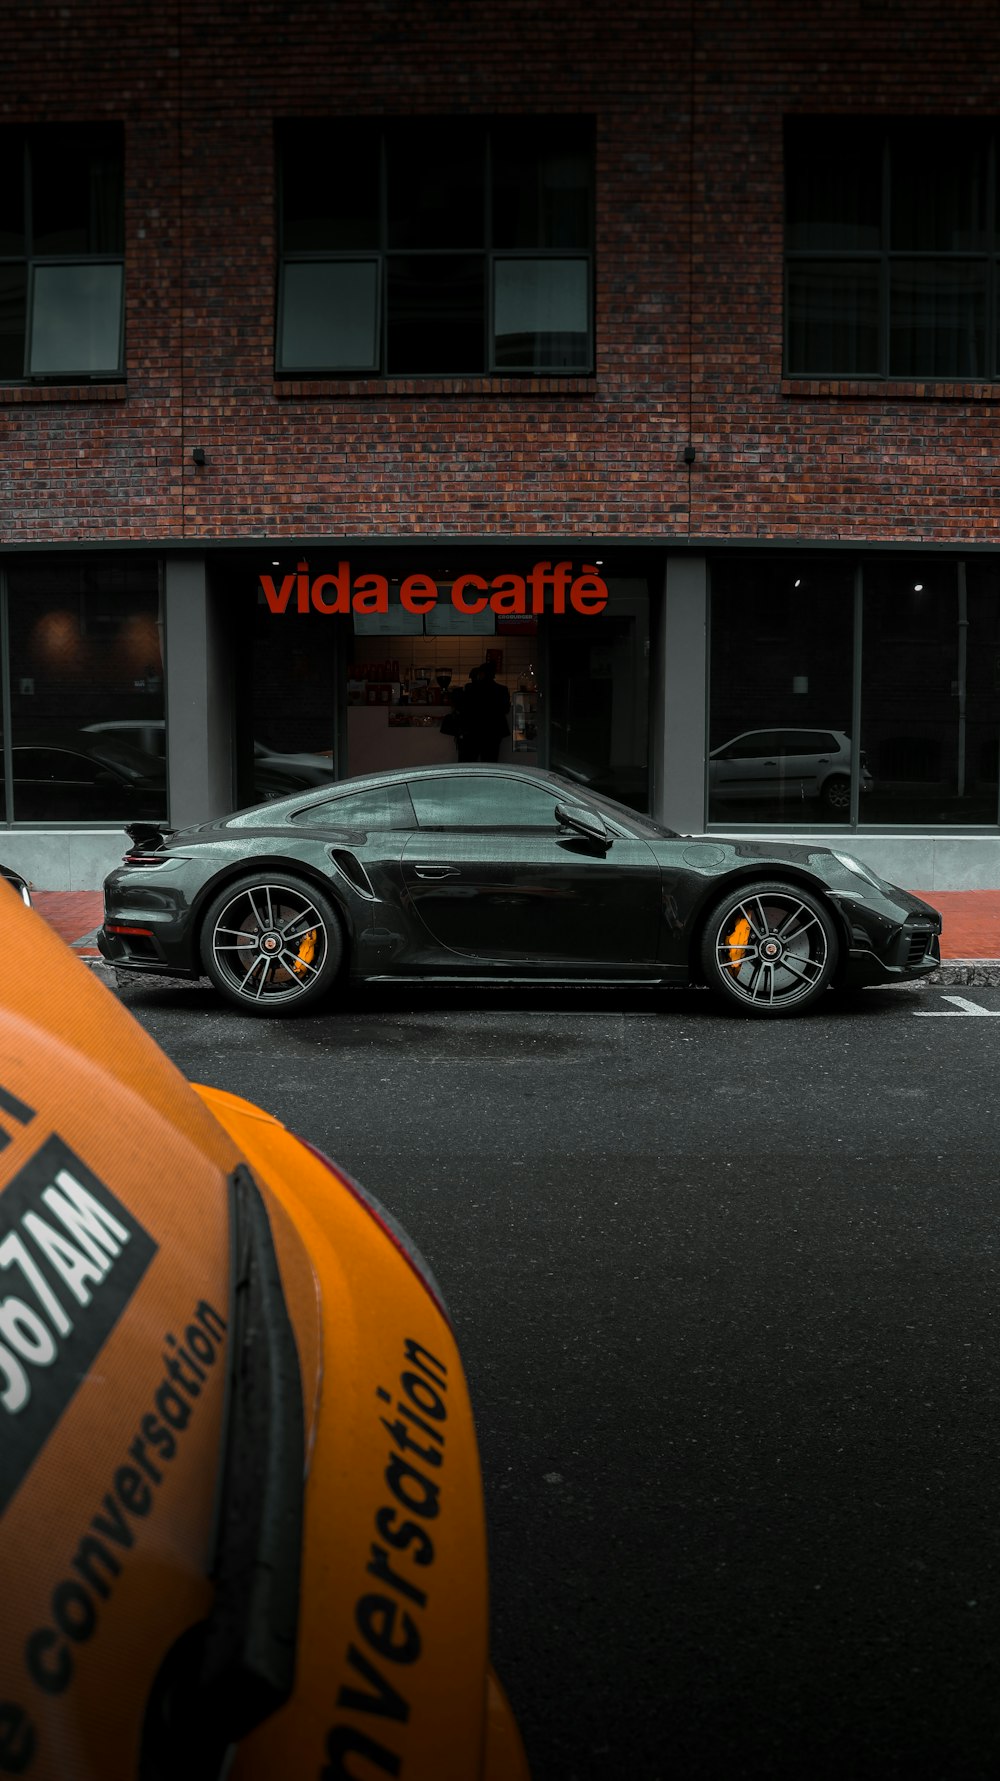 a black sports car parked in front of a cafe